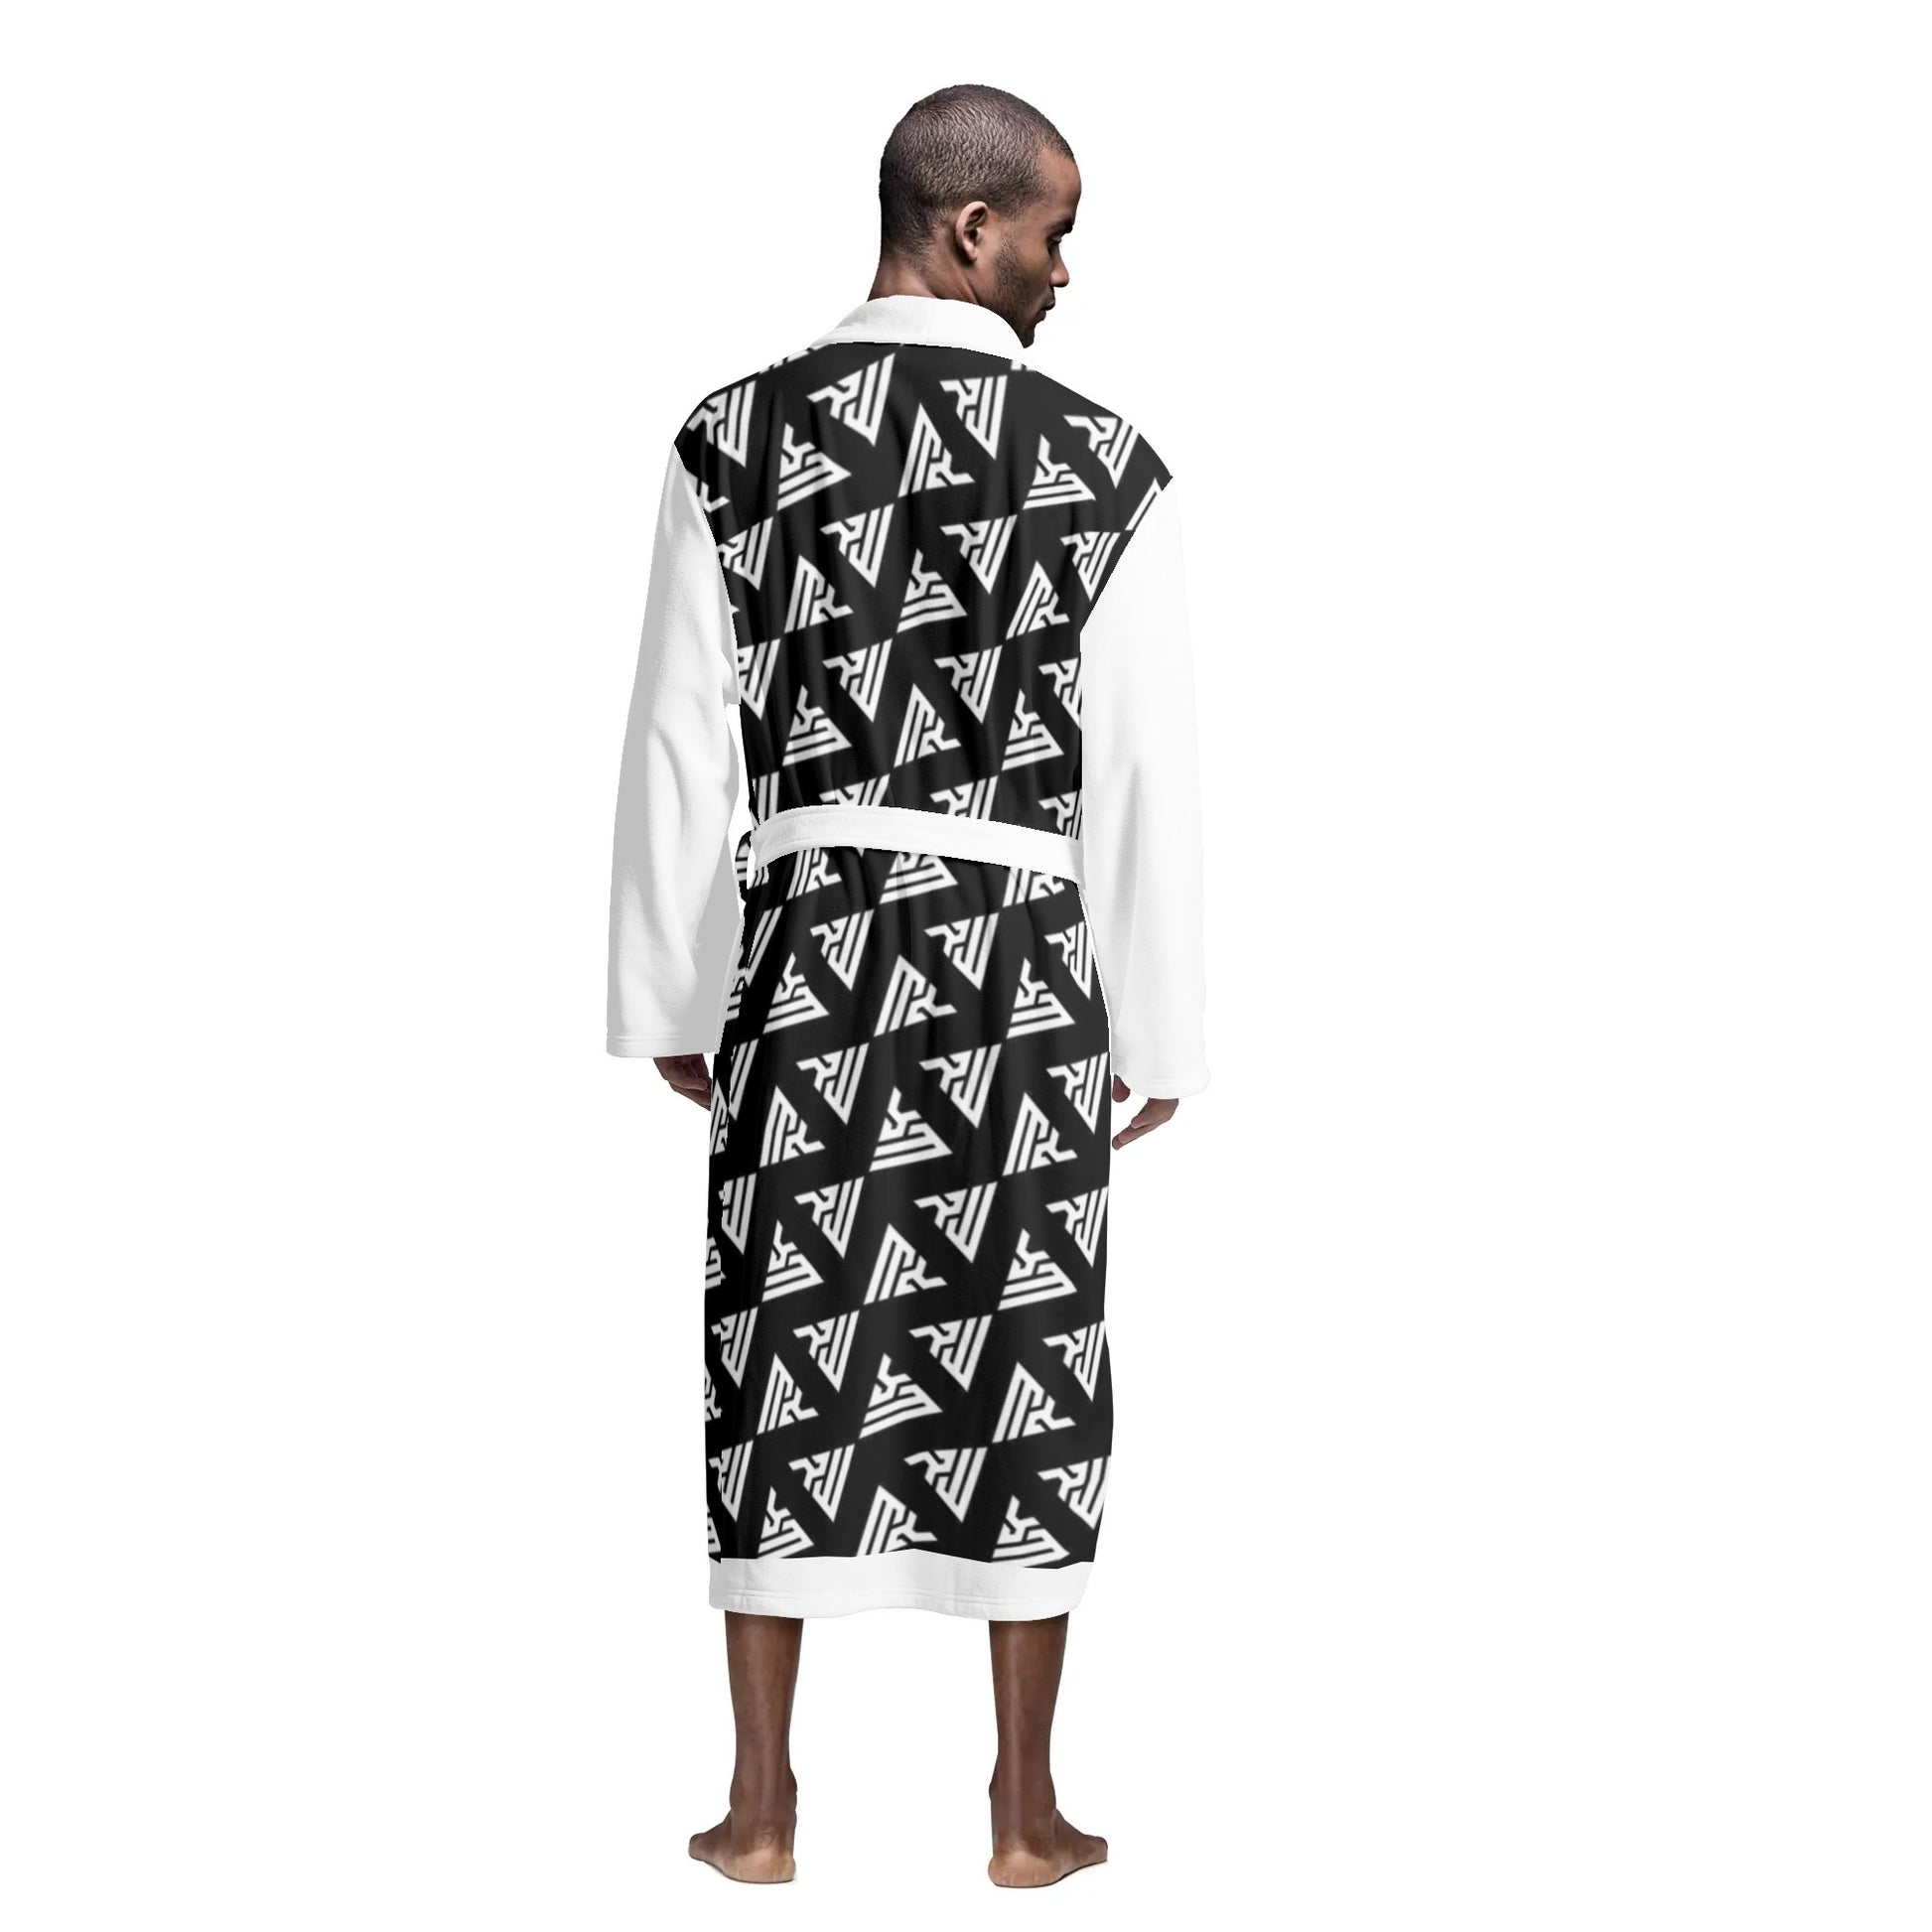 Rongoworks Spartan Bathrobe Rongoworks